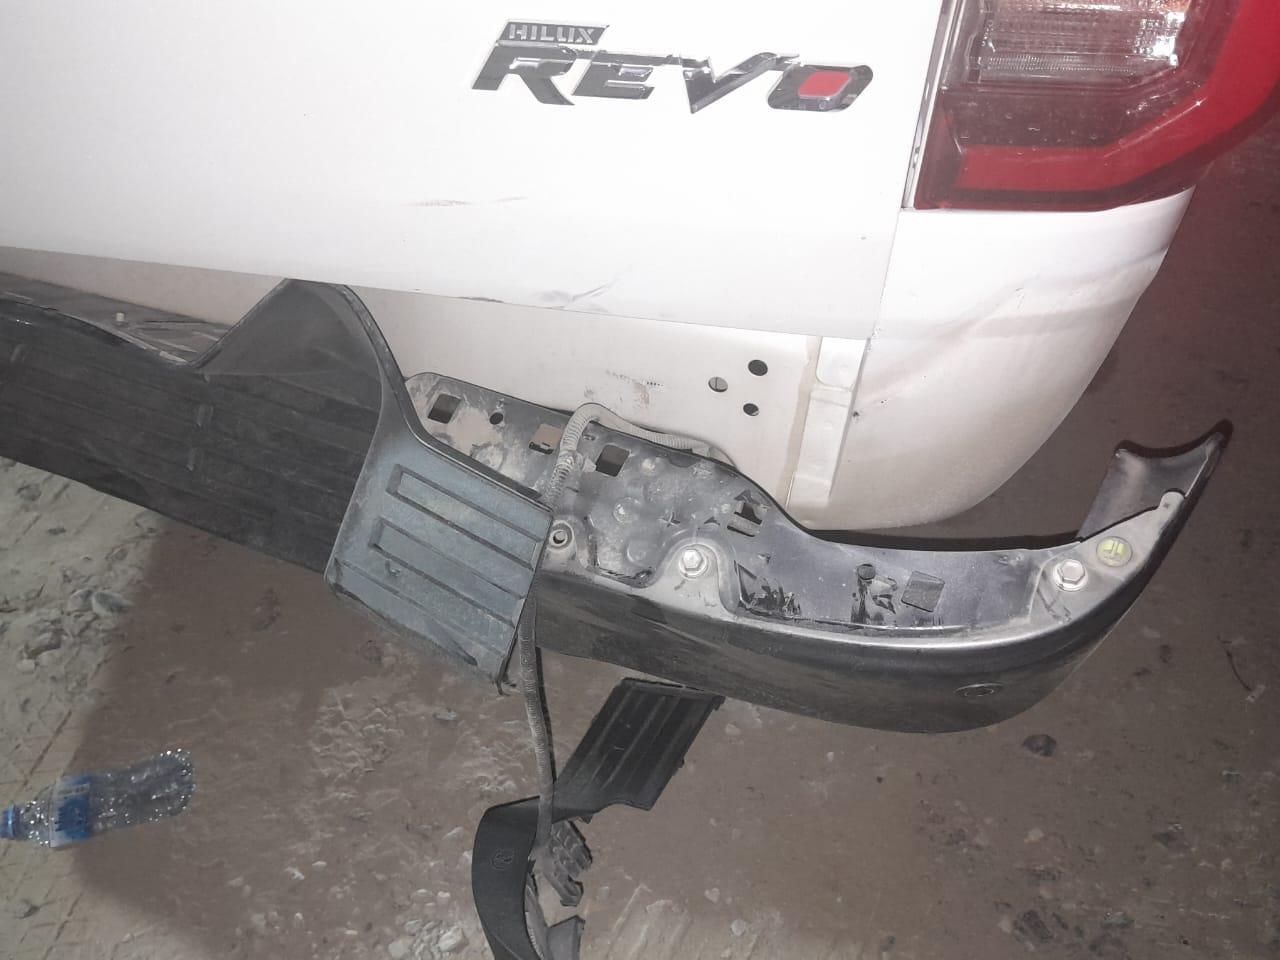 The rear that was damage on the Guyana Police Force Vehicle